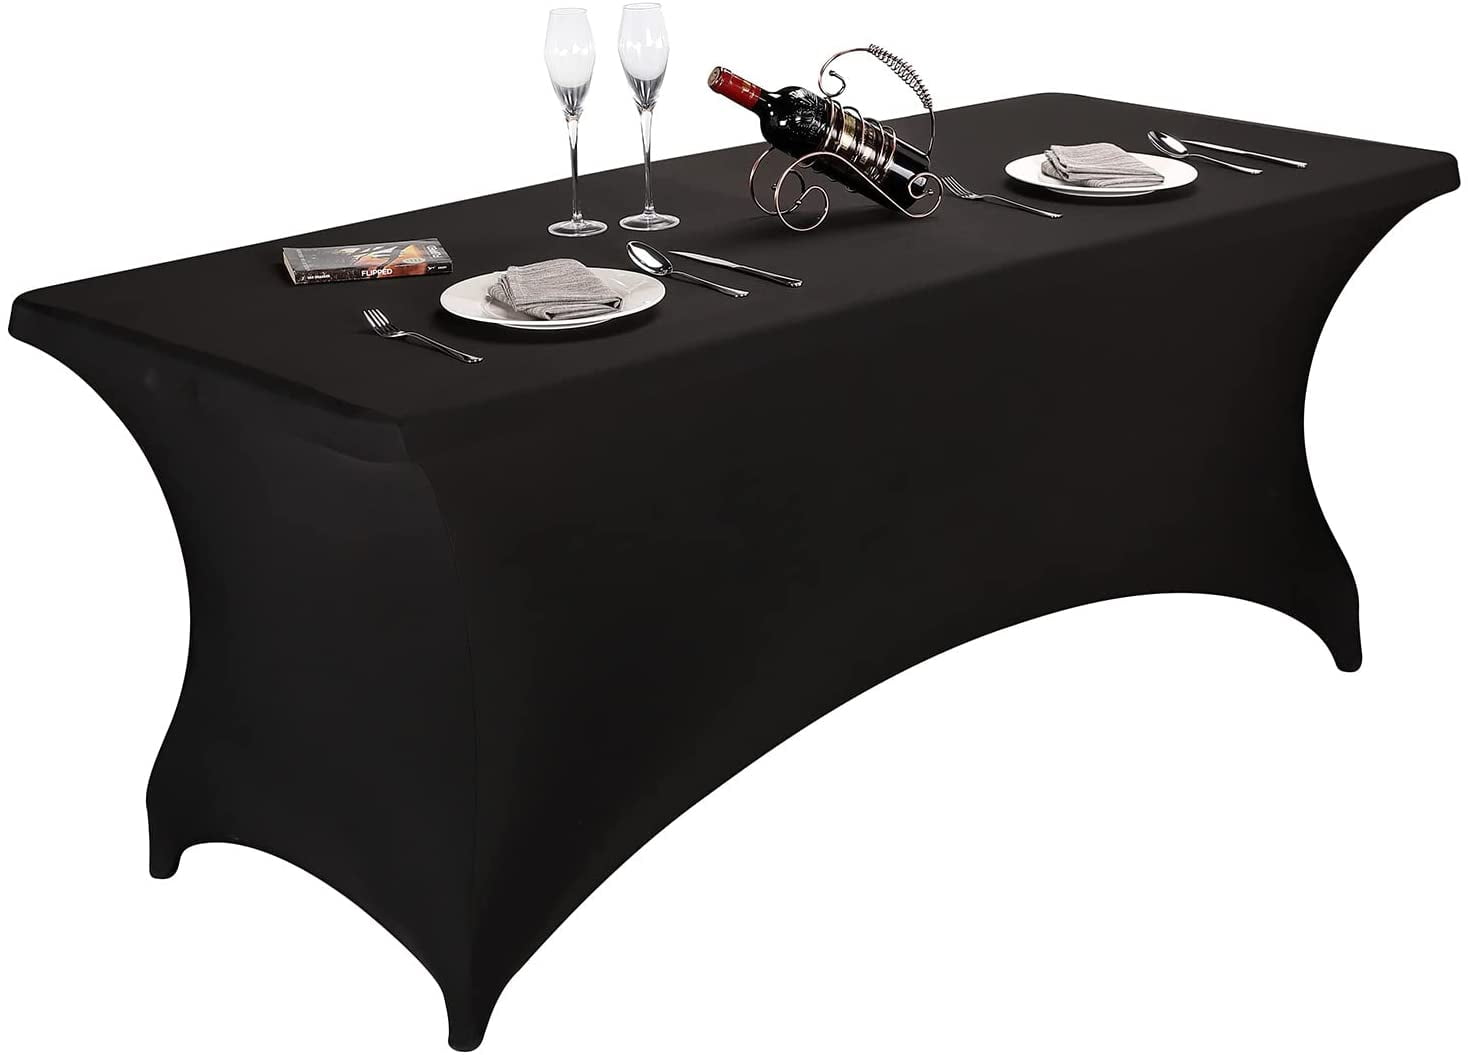 7ft x 3.5ft with Elasticated Edge Black Vinyl Poker Table Cover 